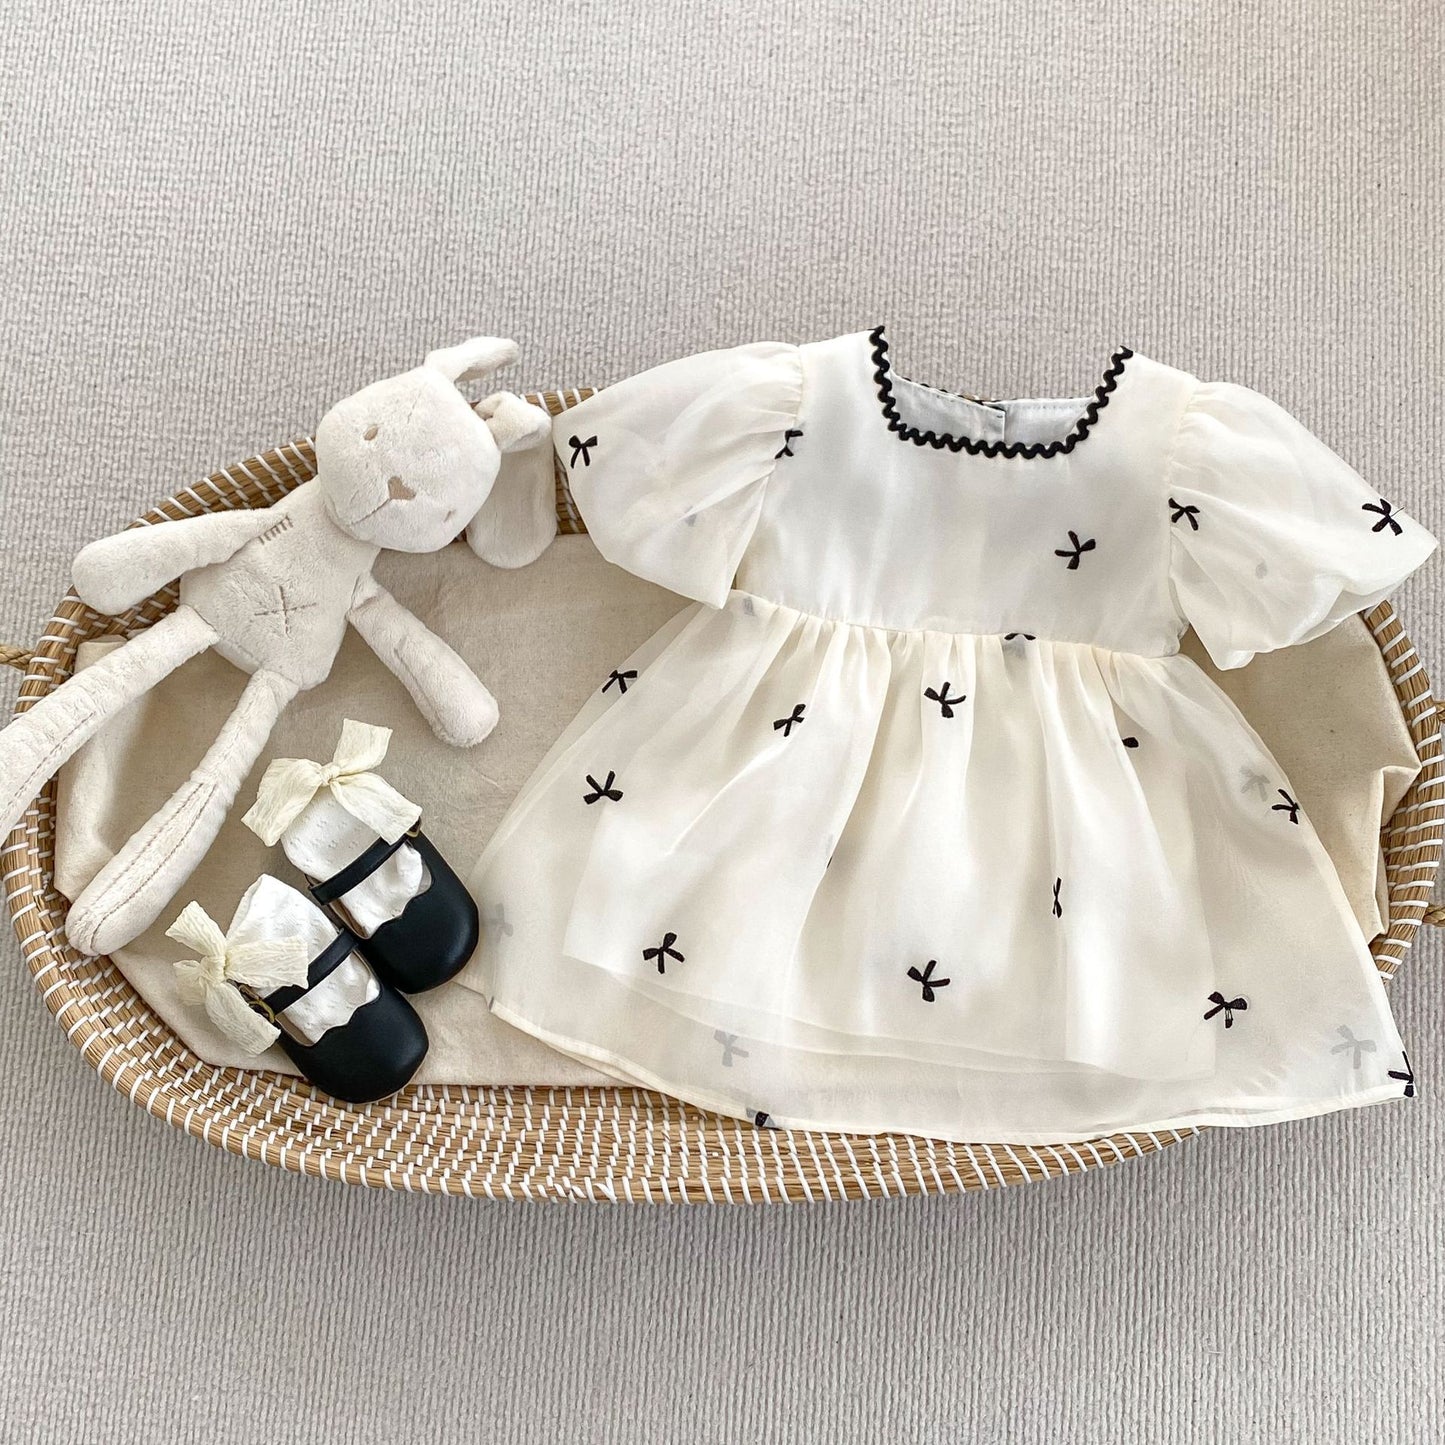 New Design Summer Baby Kids Girls Bows Embroidery Dress